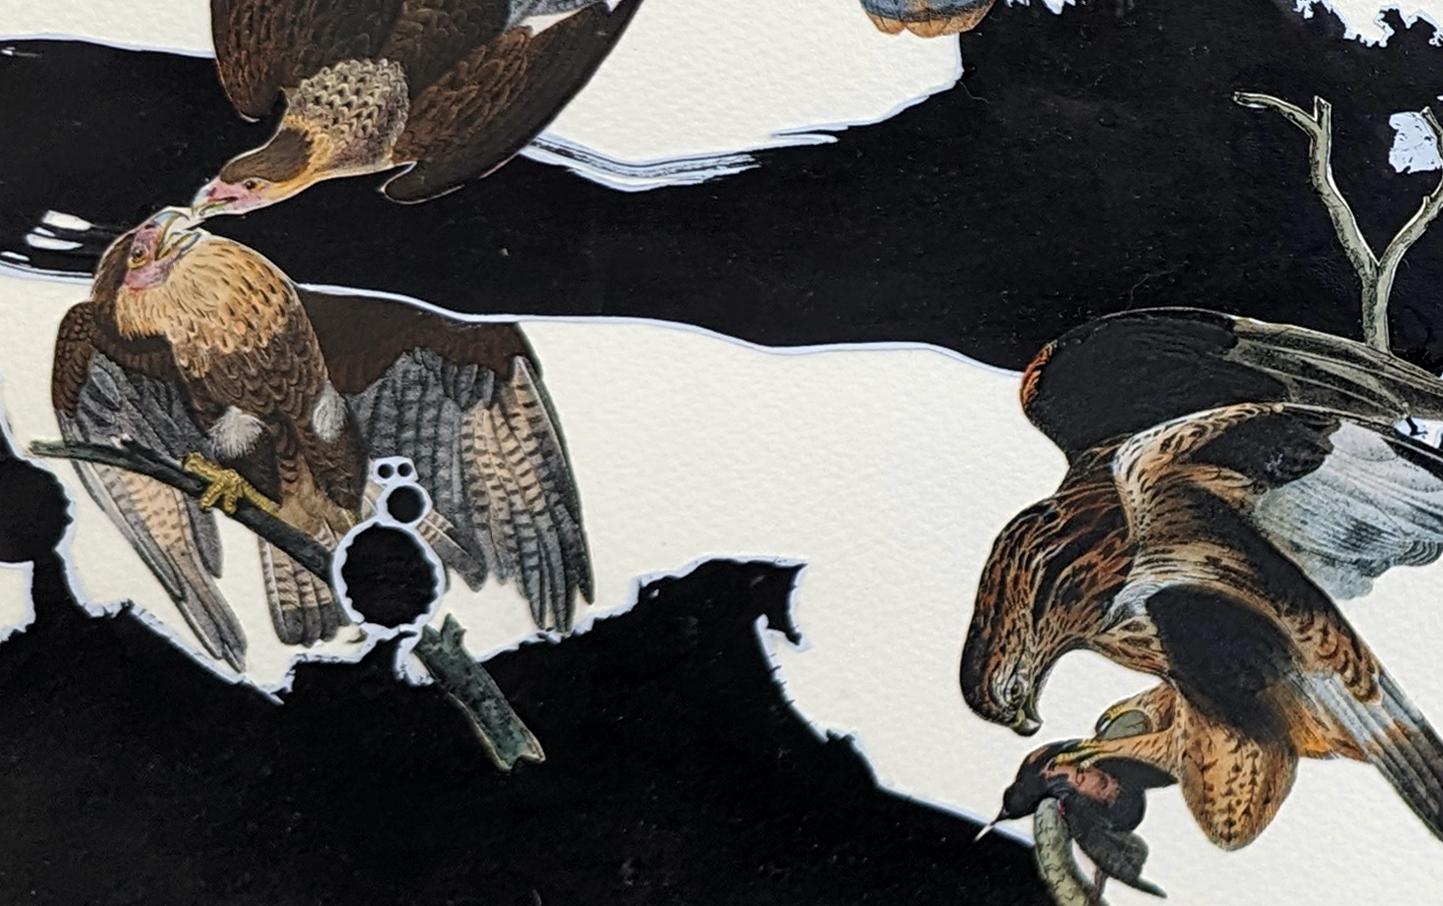 An artwork on paper by New York artist Miranda Maher. Black archival ink on pale blue archival paper with historical Audubon images of American birds, mounted on Arches paper.

Miranda Maher’s artistic journey is a profound exploration of